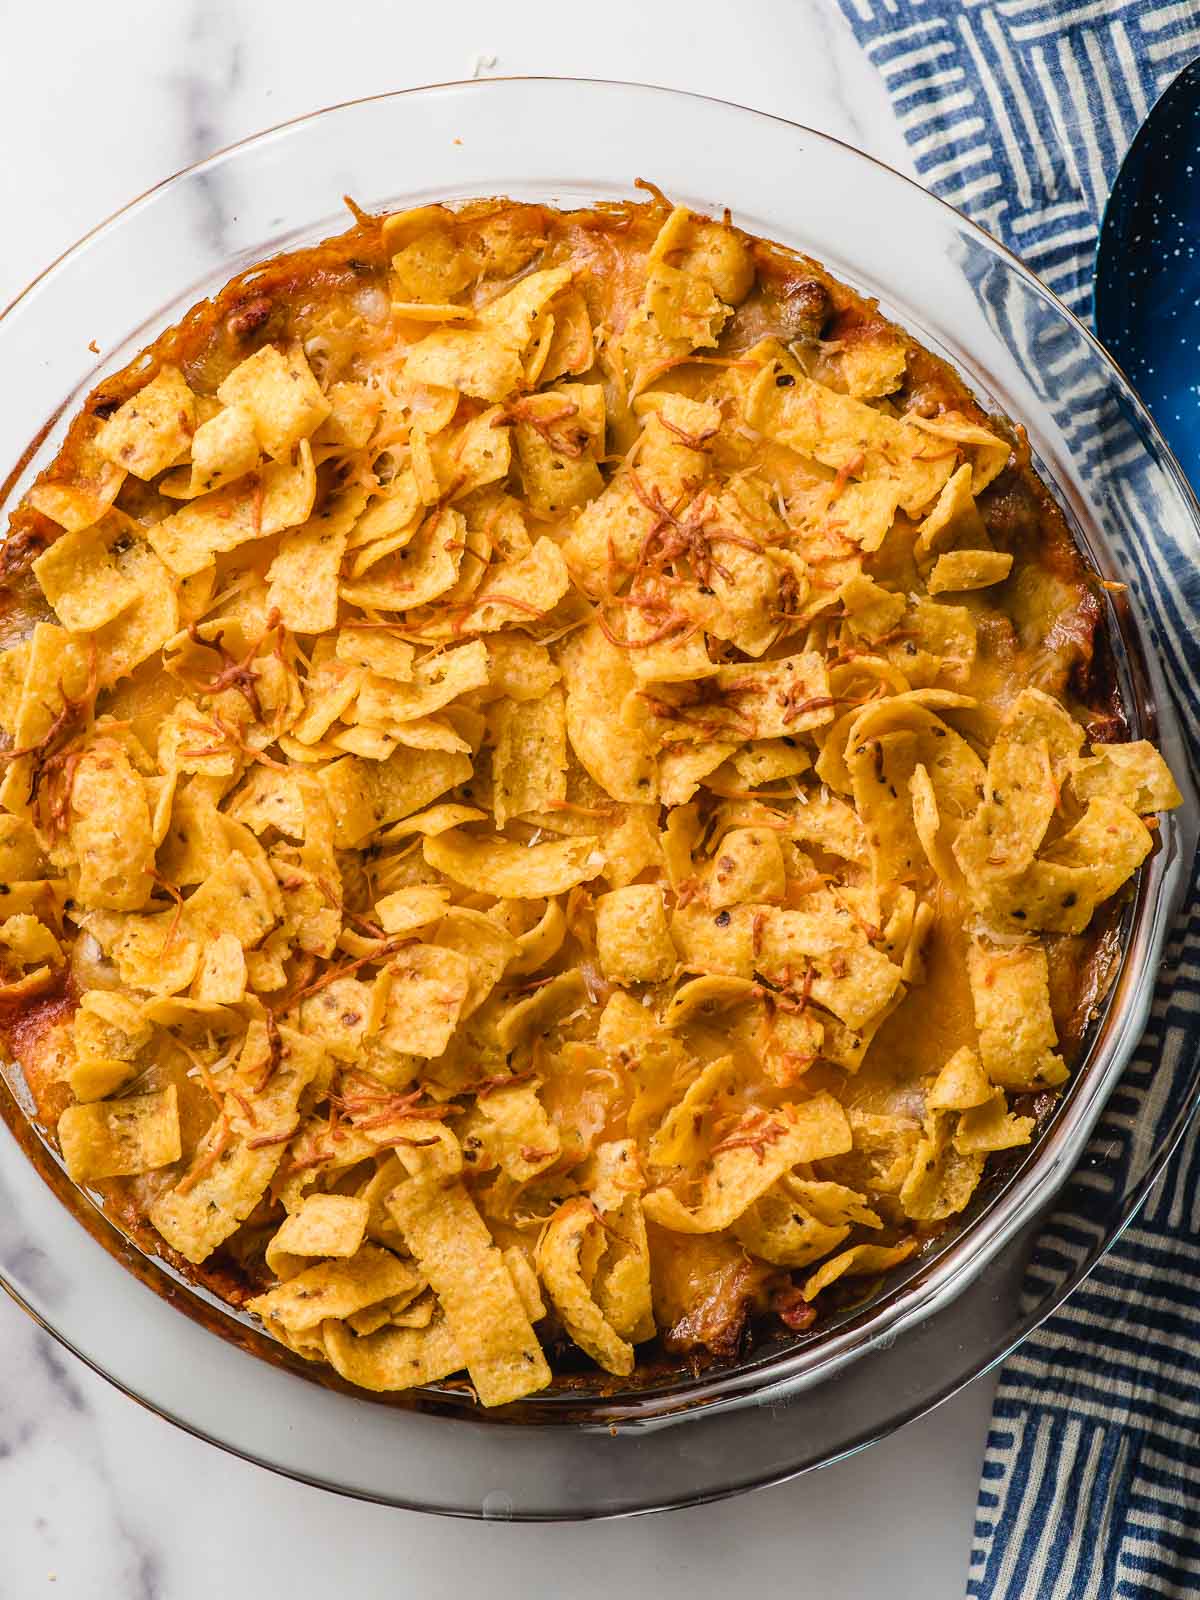 Round casserole dish filled with taco casserole and topped with Fritos.